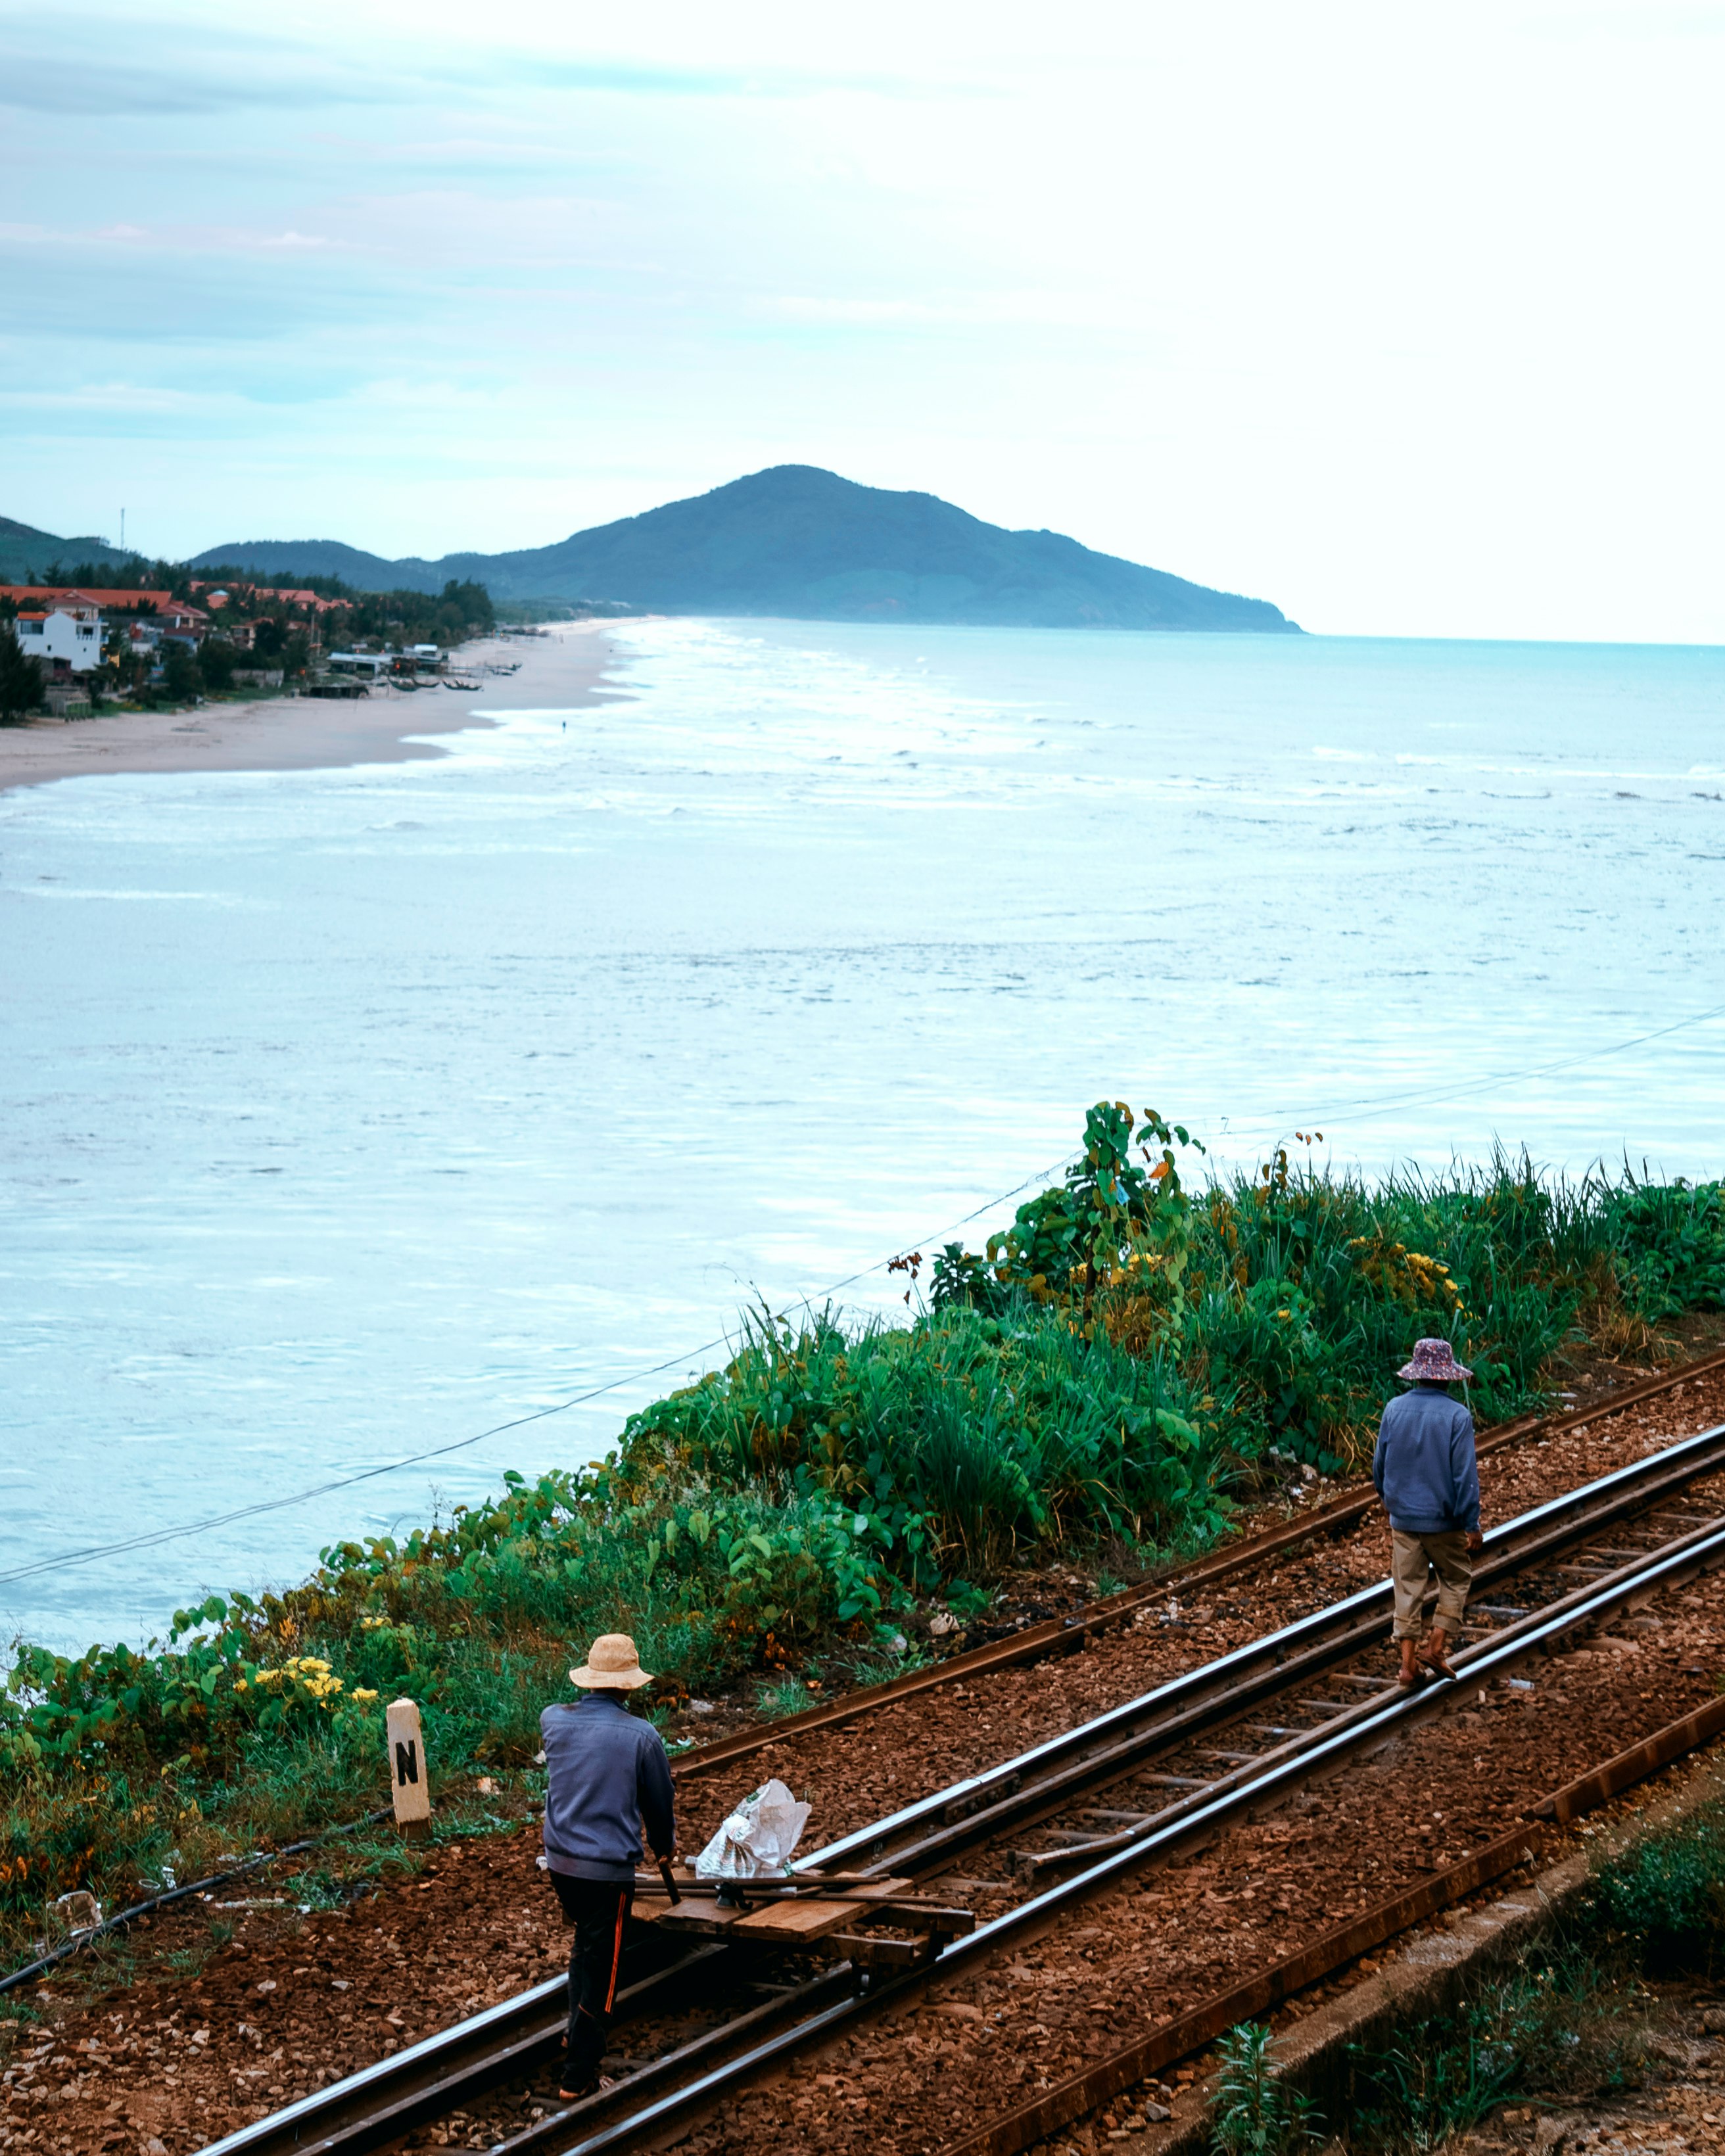 man and woman walking on train rail near body of water during daytime